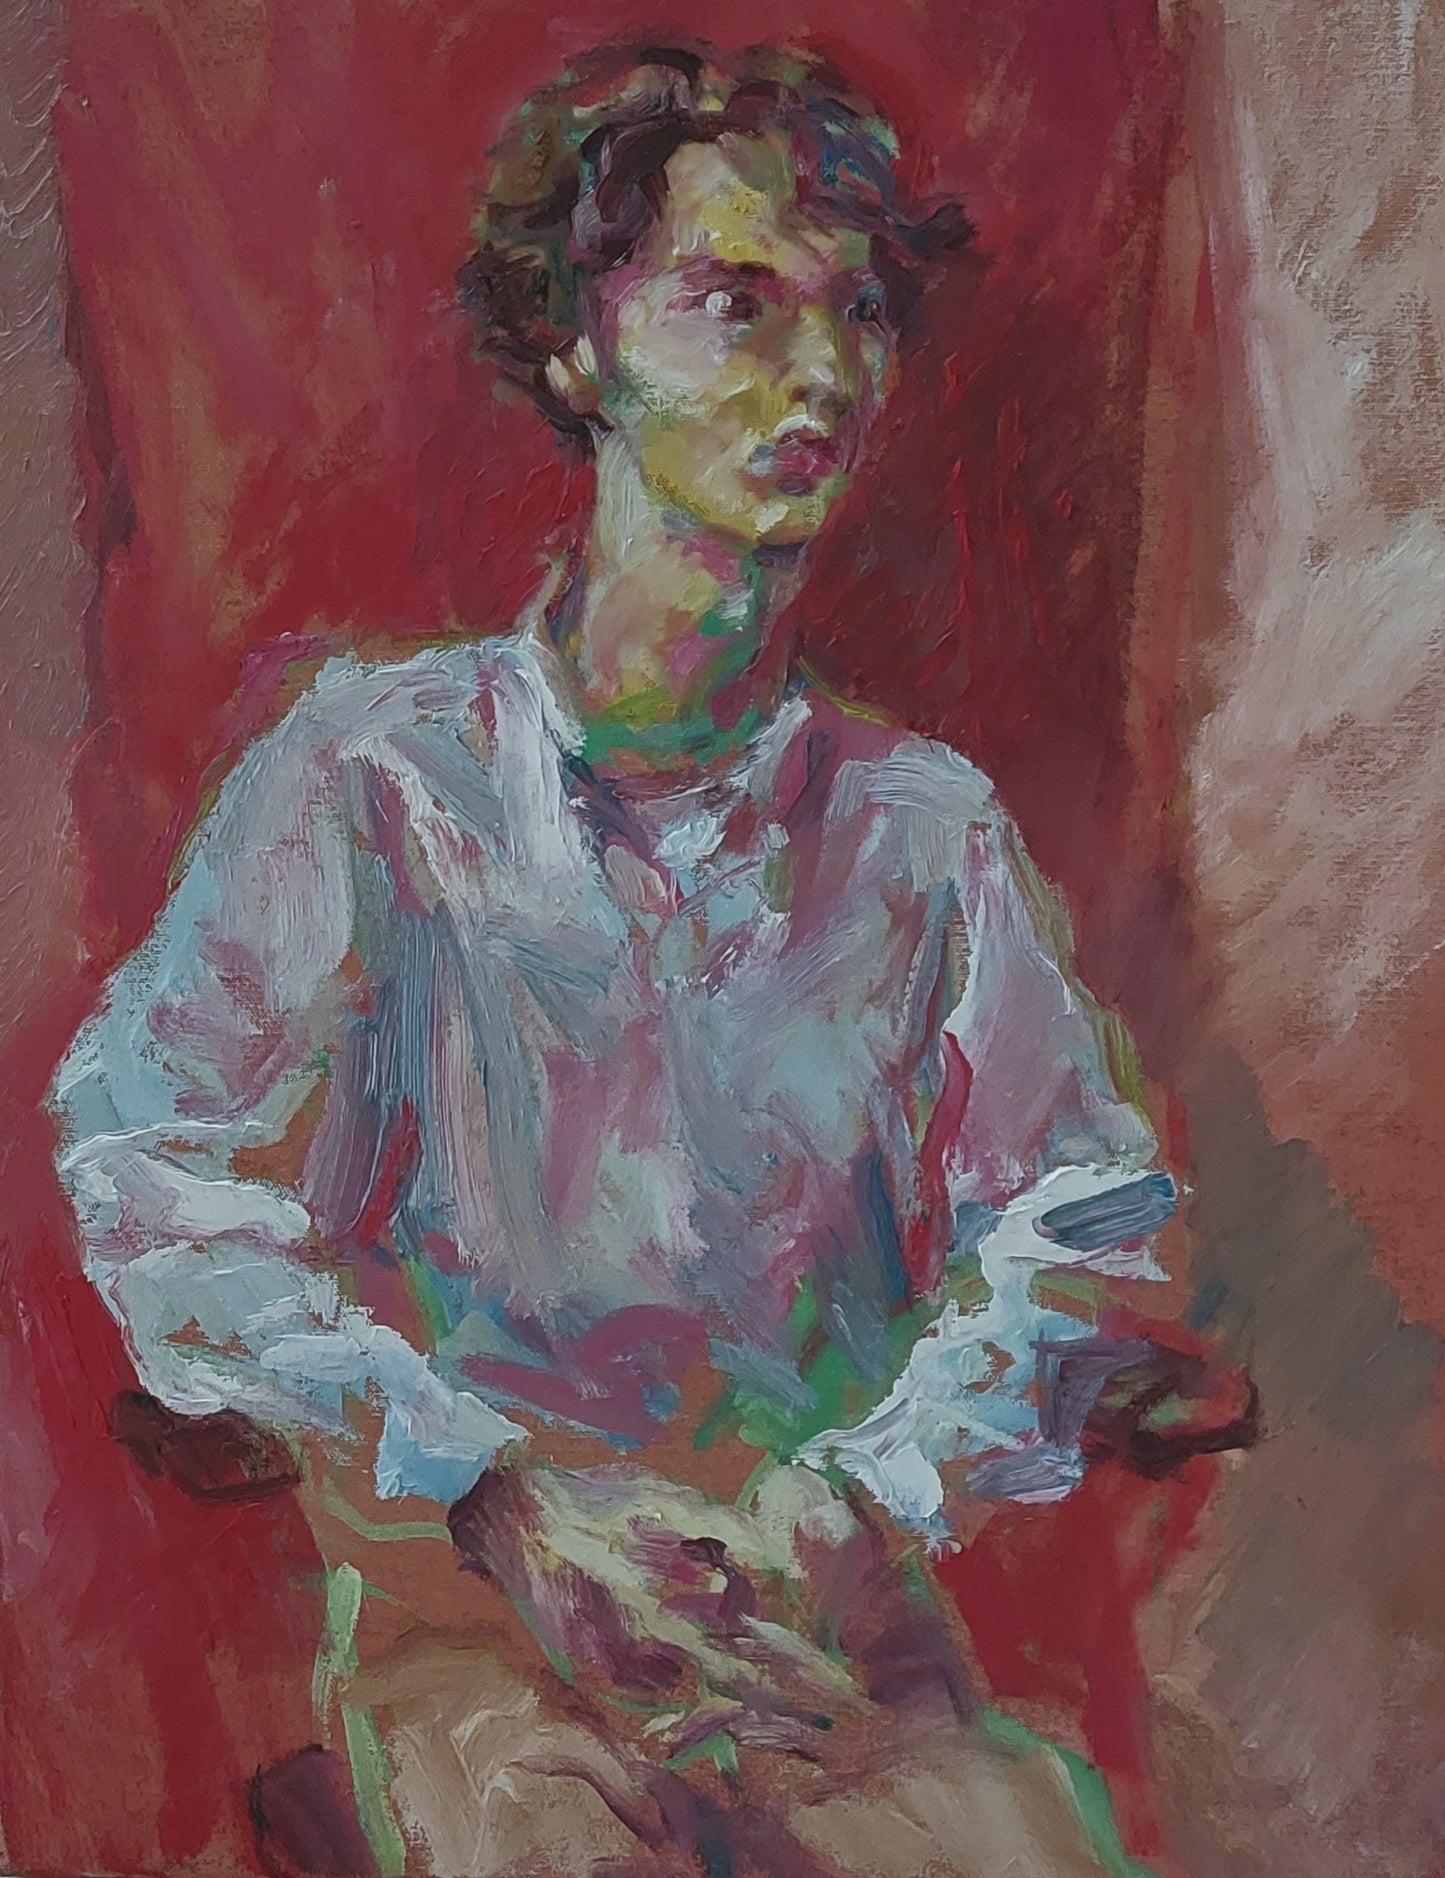 ‘Boy with white shirt’ 2003
oil on linen 50x40cm